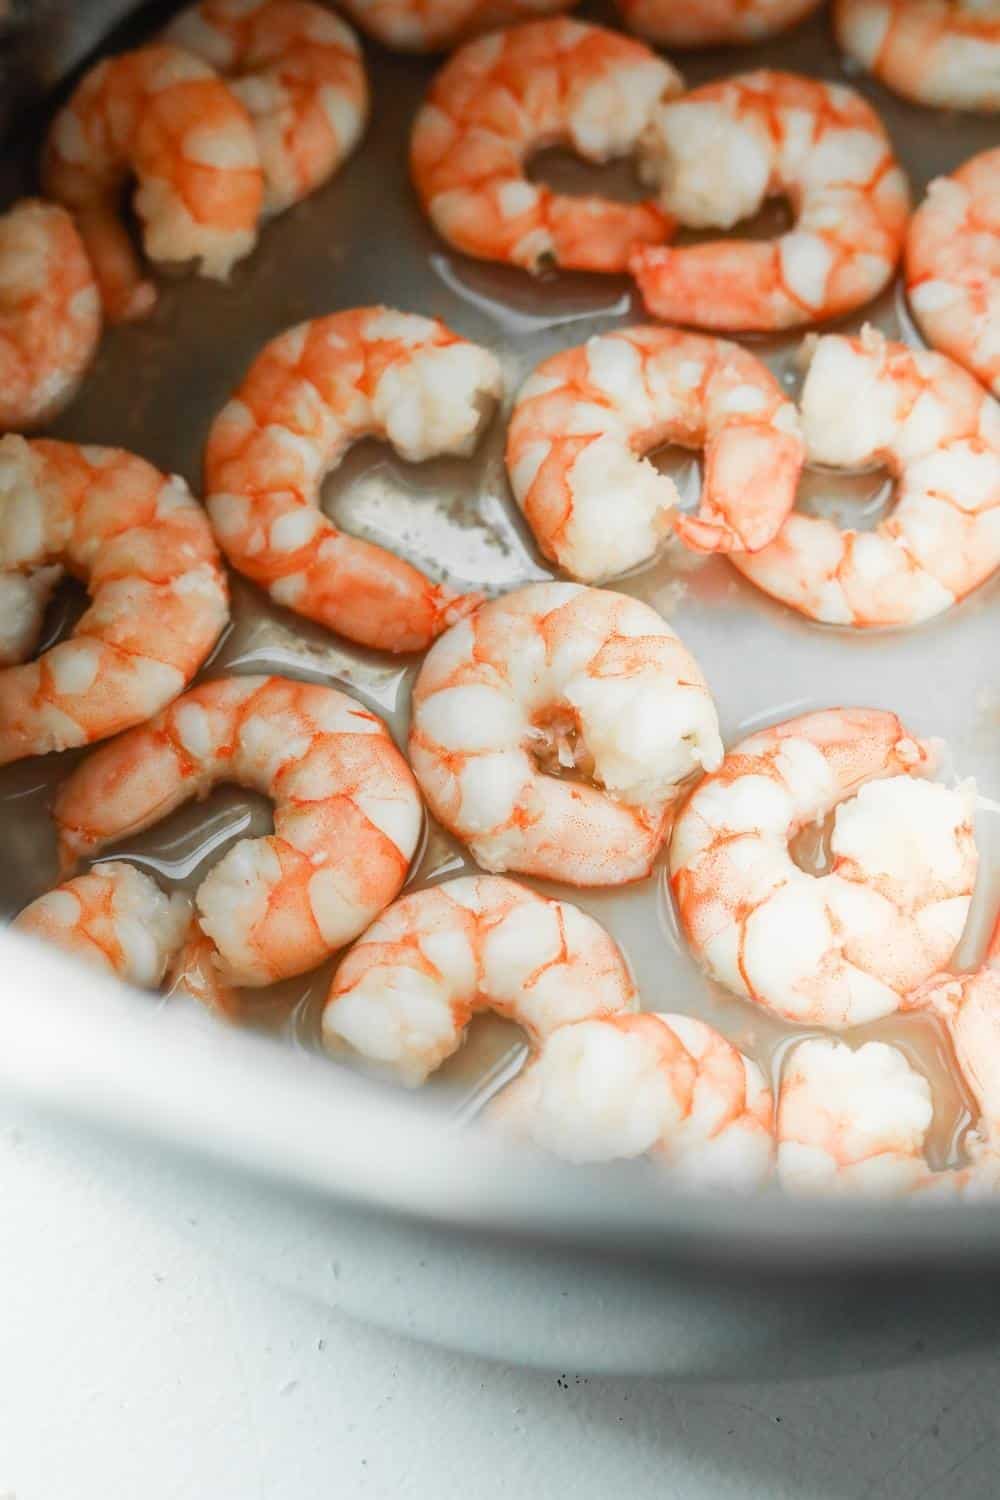 Cooked shrimp in an Instant Pot.